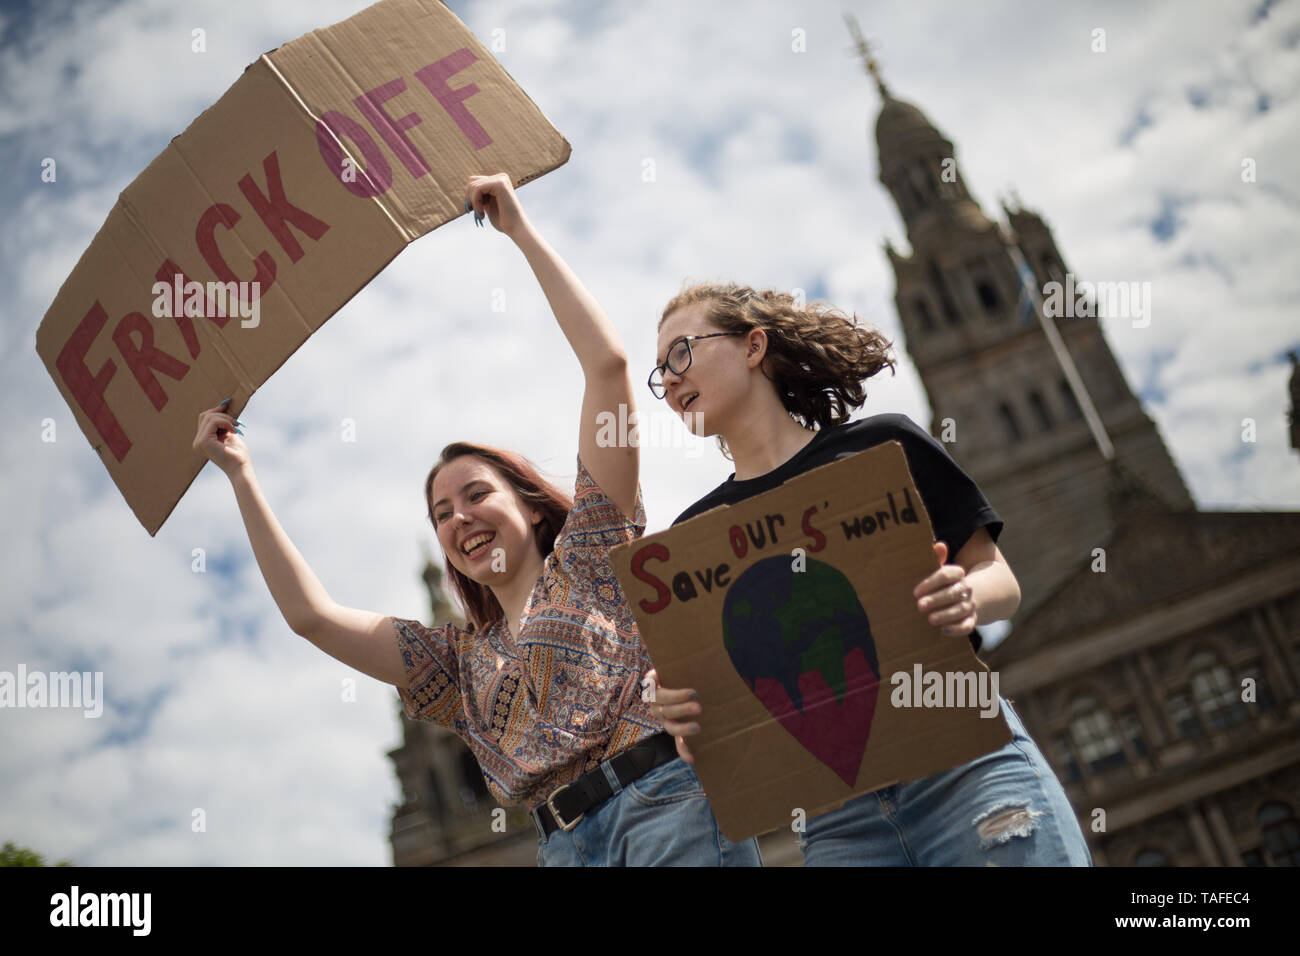 Glasgow, UK. 24th May 2019.  The contuing Friday stikes by chldren and youths, to protest against inadequate action by governments on the climate crisis. Credit: jeremy sutton-hibbert/Alamy Live News Stock Photo